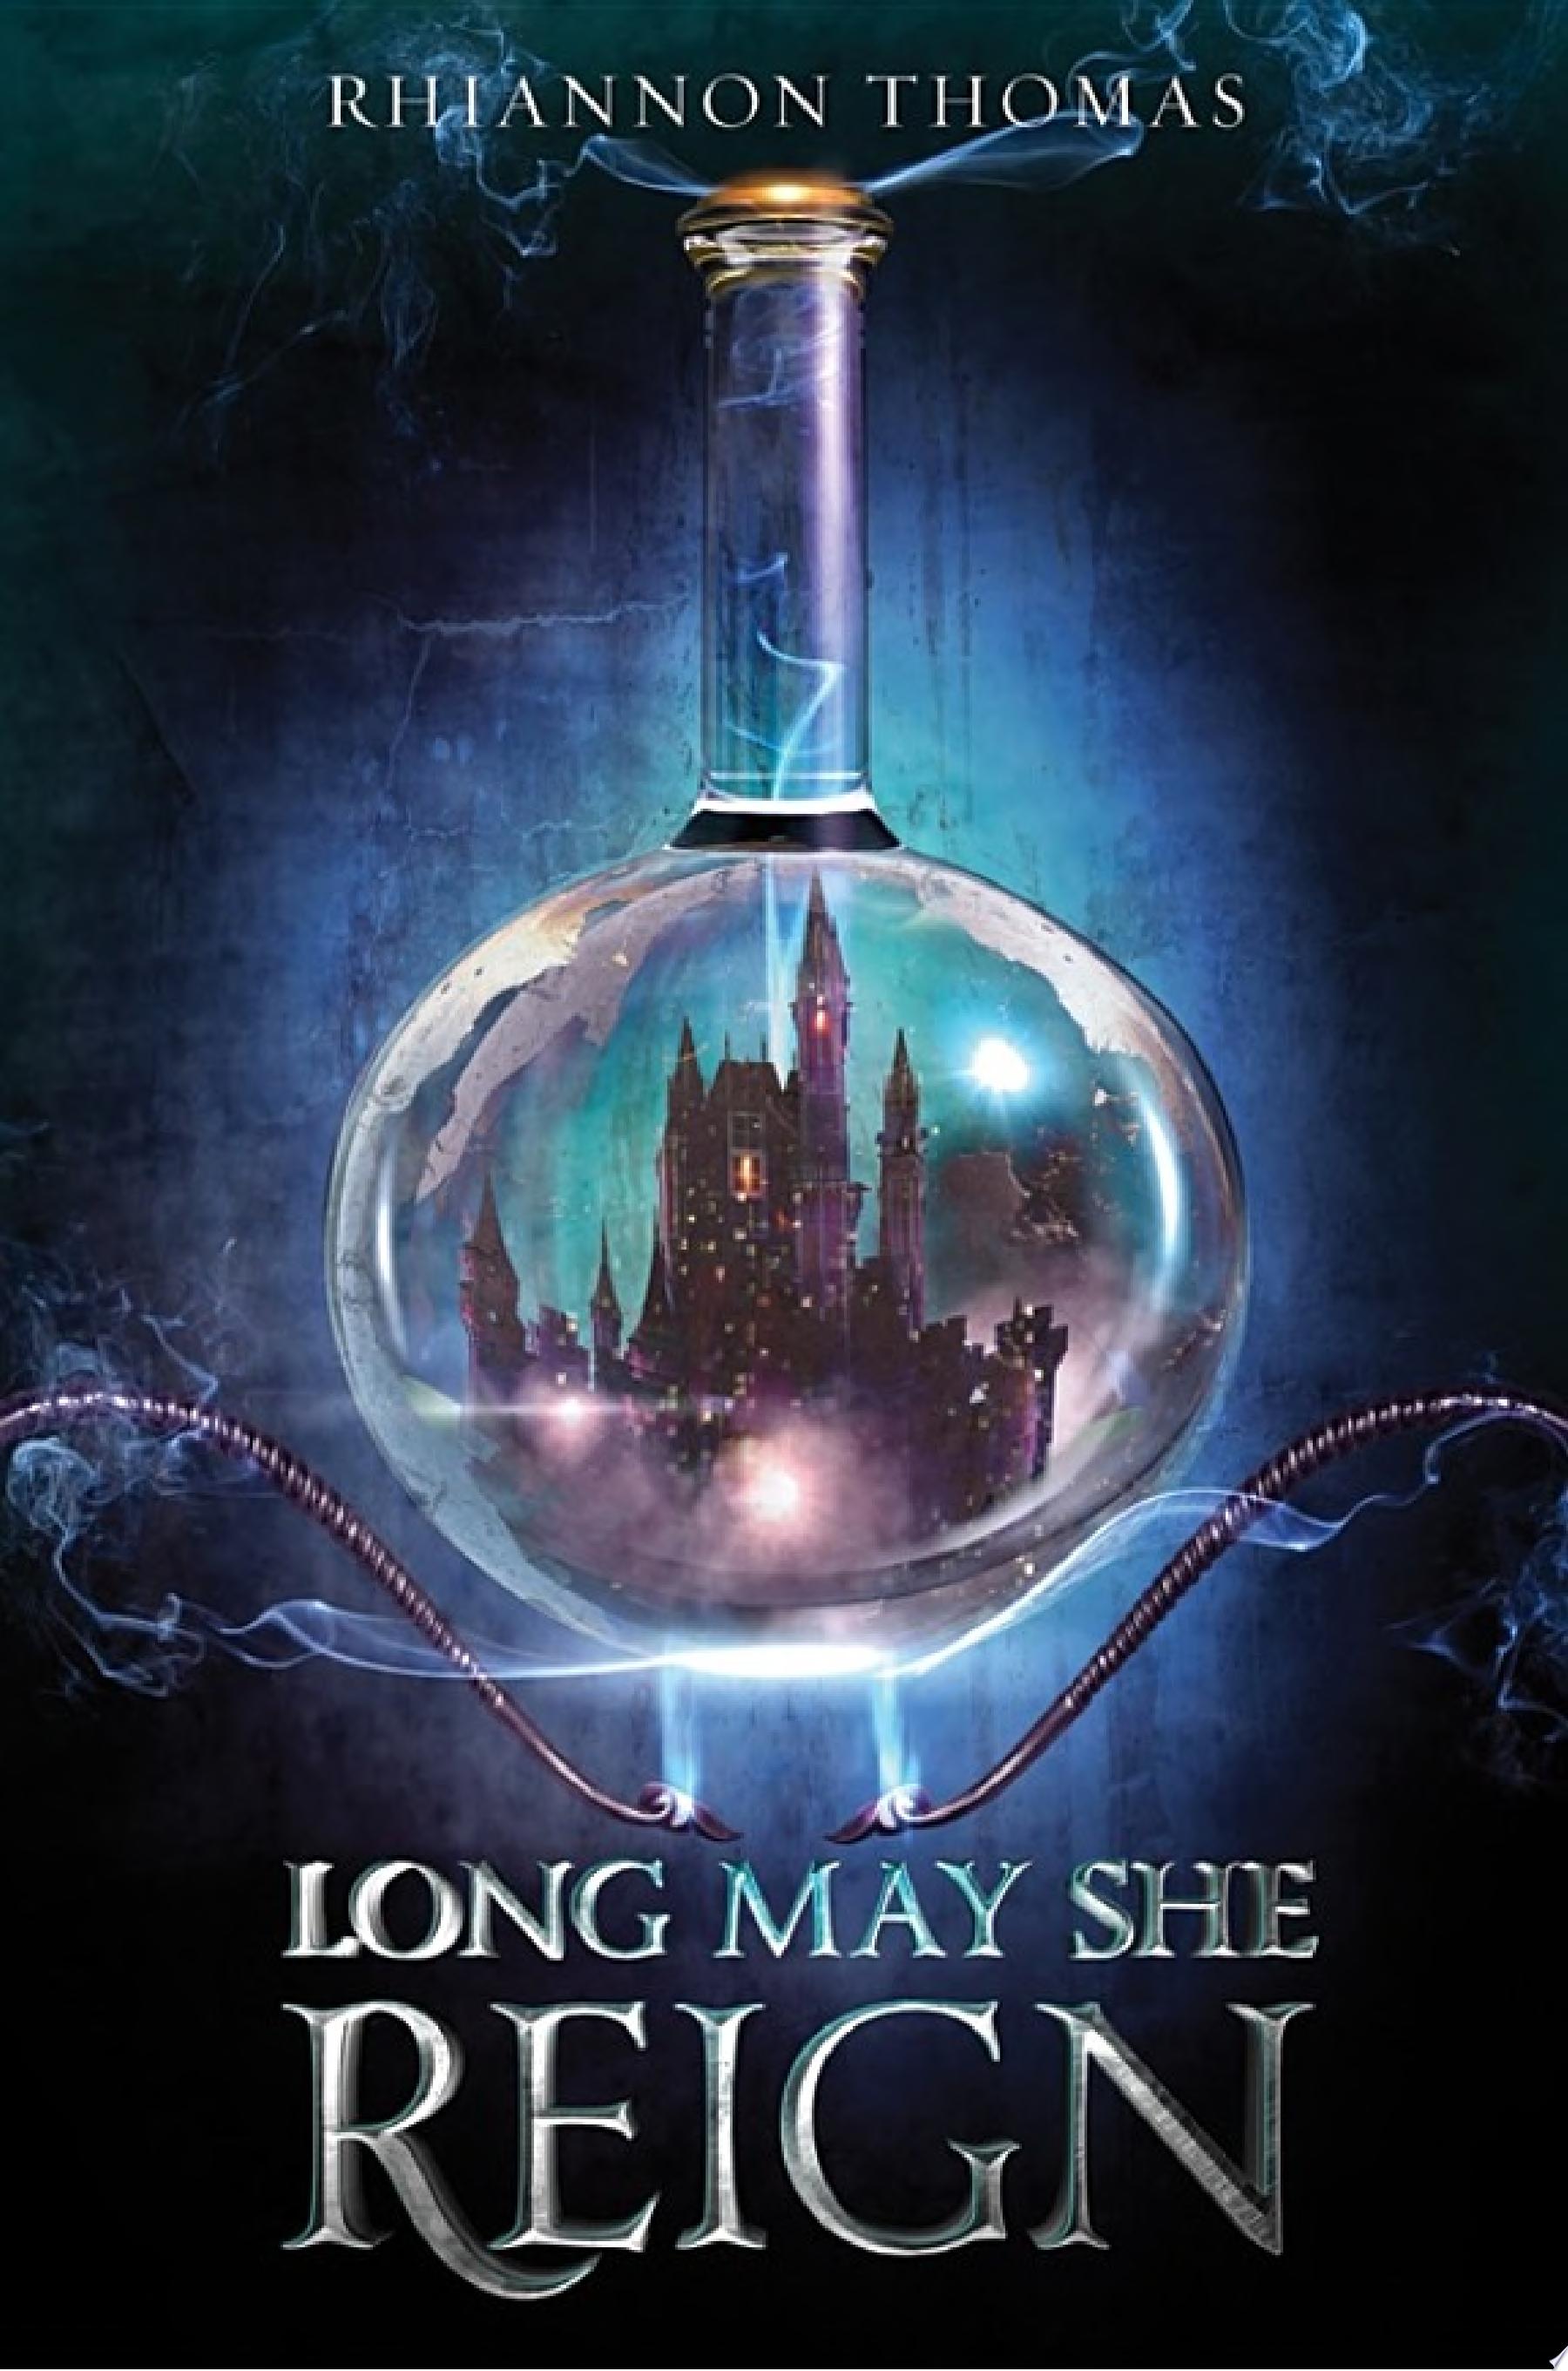 Image for "Long May She Reign"